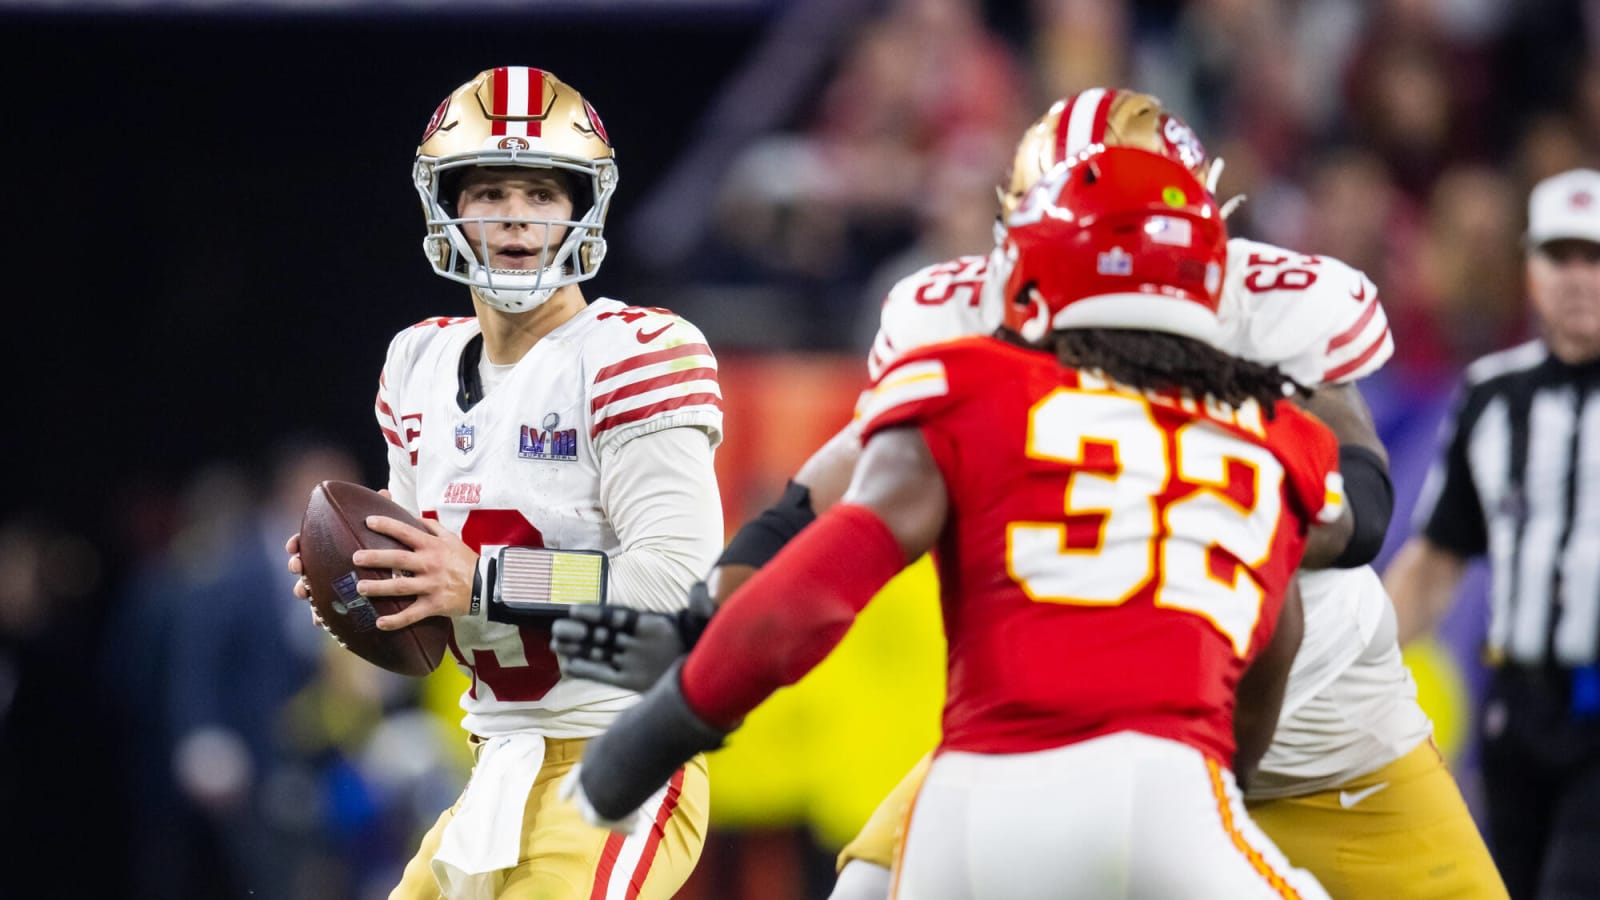 Super Bowl rematch between 49ers and Chiefs will be during Week 7